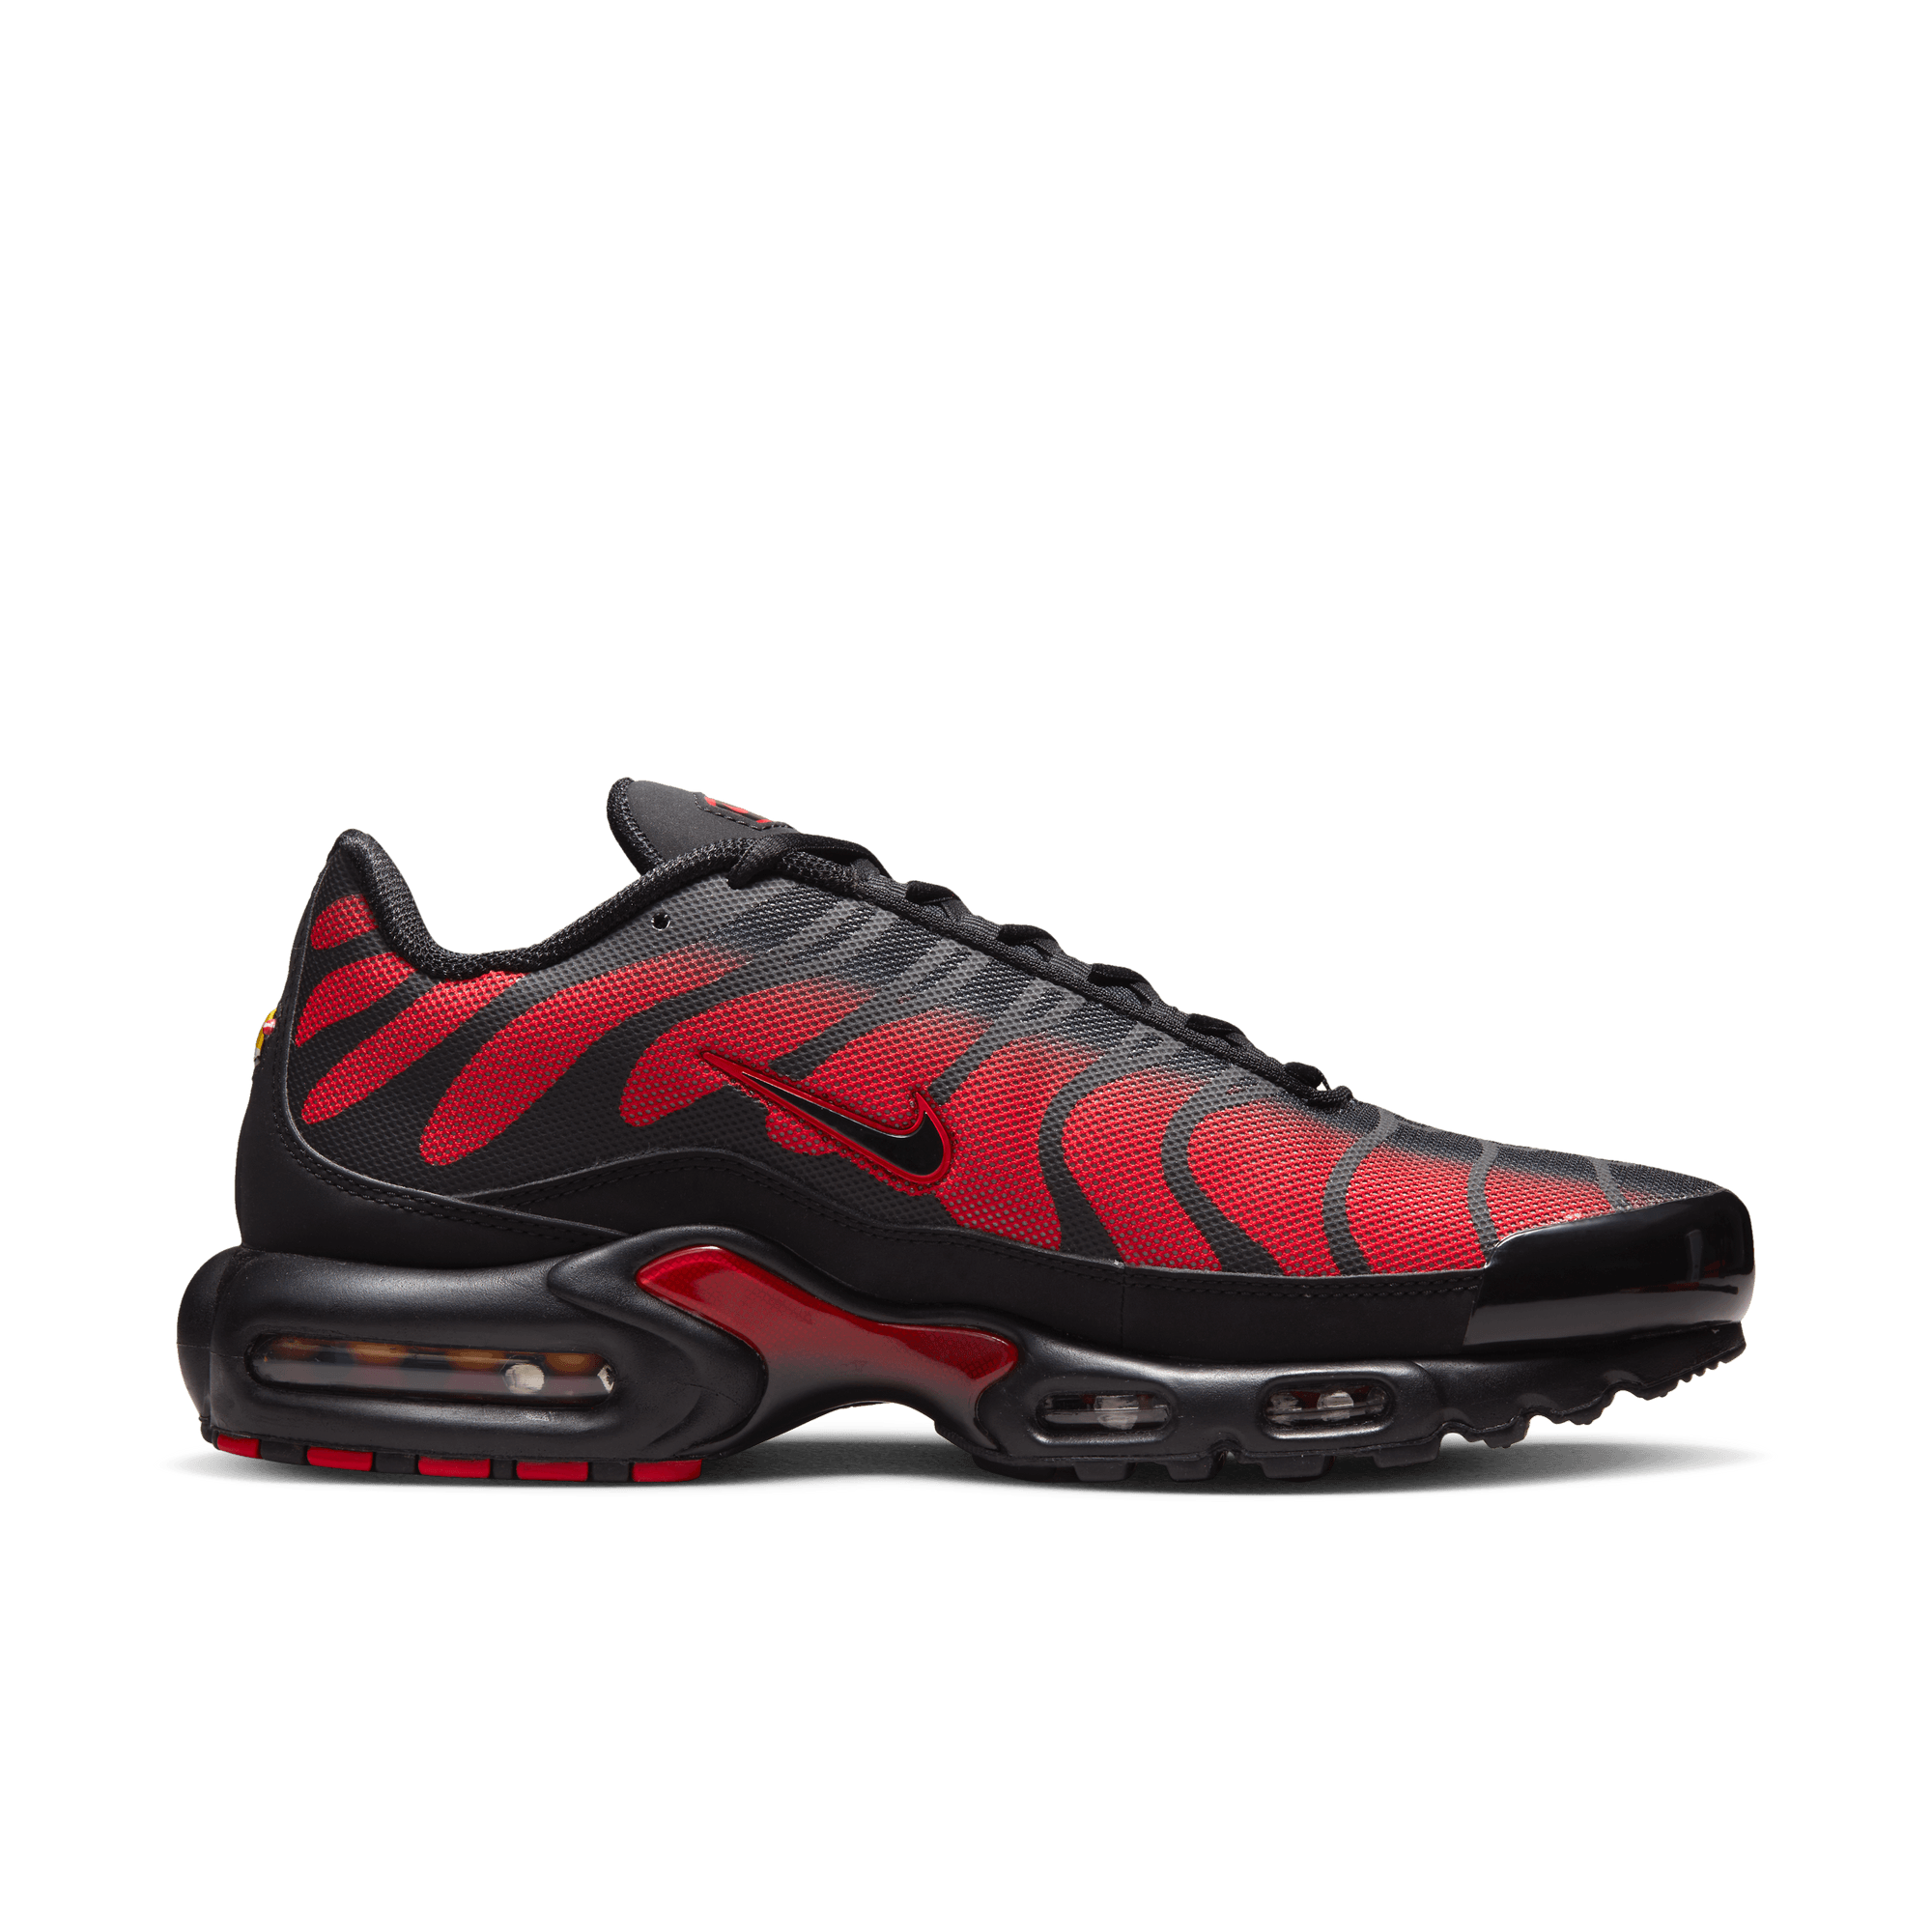 Need Help Finding: Nike Mercurial Air Max Plus Tn. Was able to